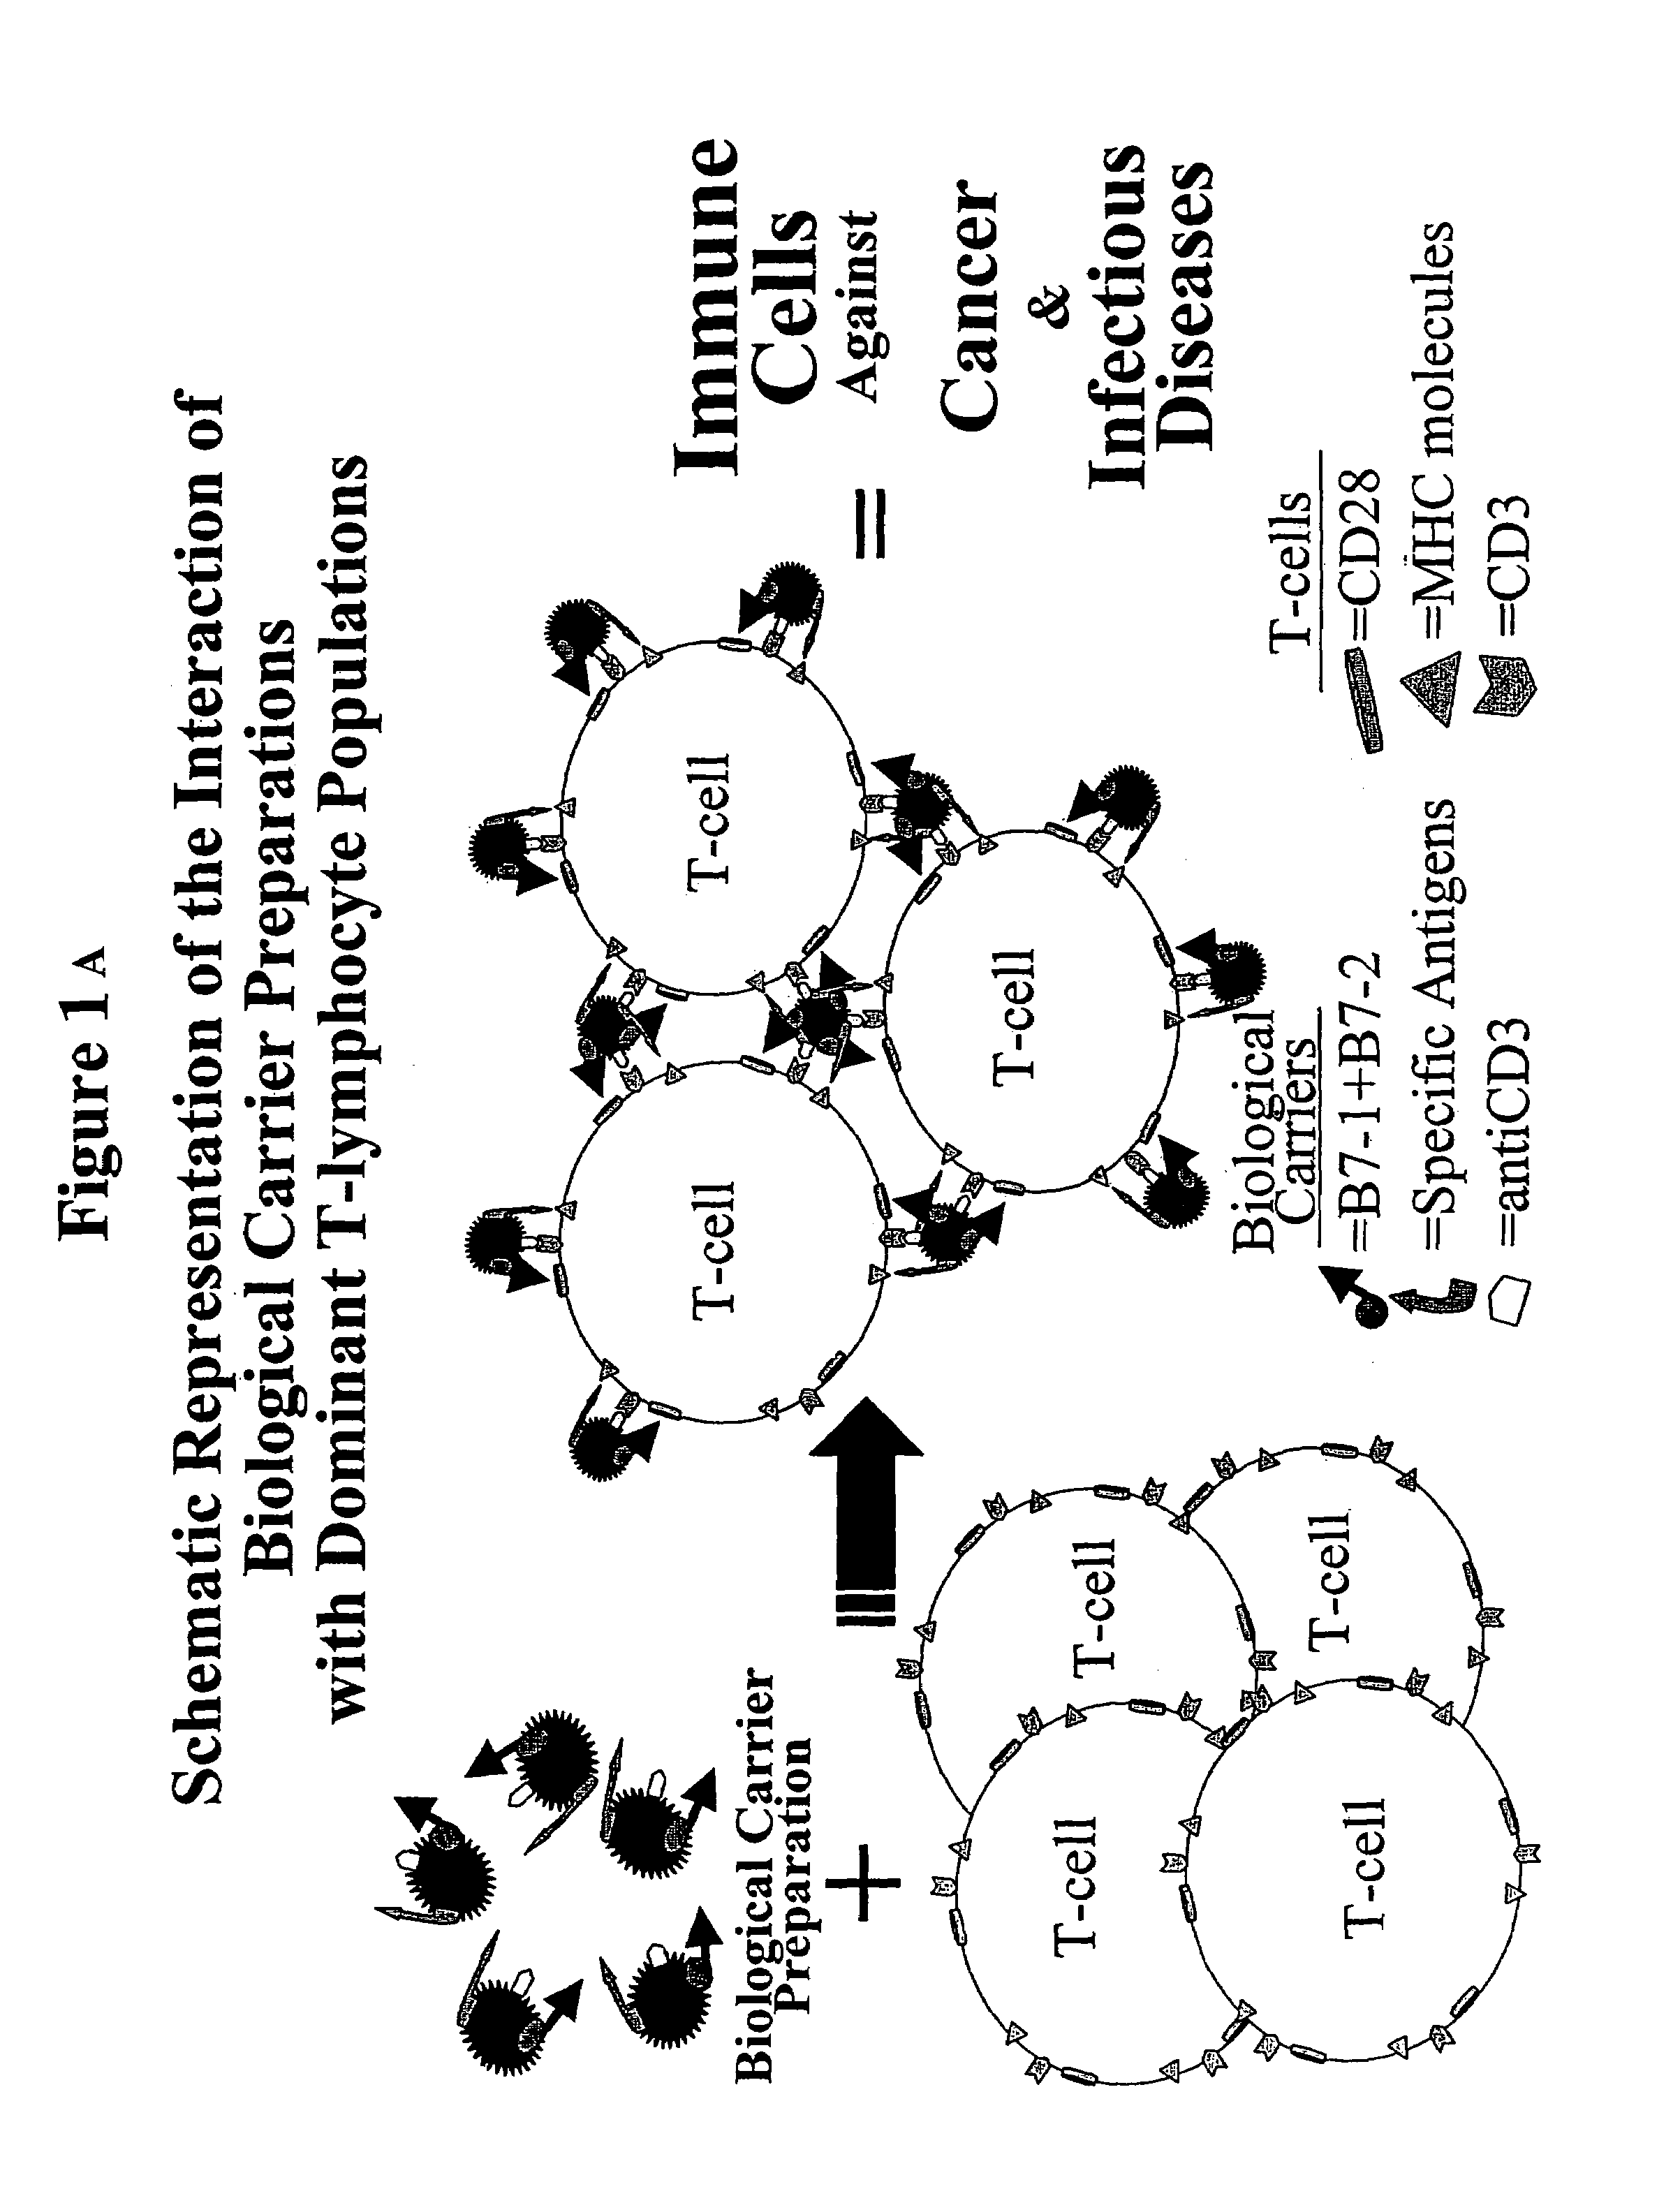 Production of "biological carriers" for induction of immune responses and inhibition of viral replication